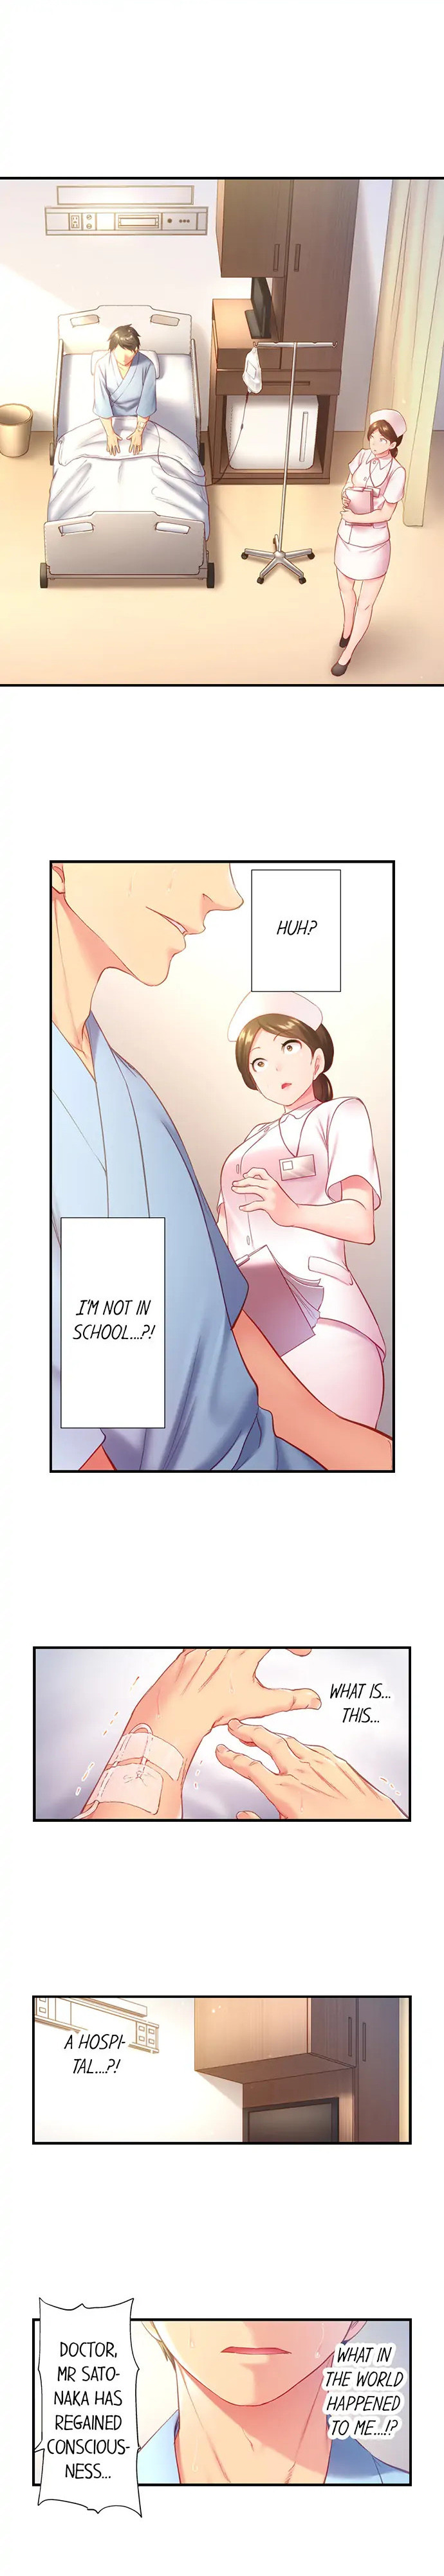 First Time With My Wife (Again) - Chapter 1 Page 5